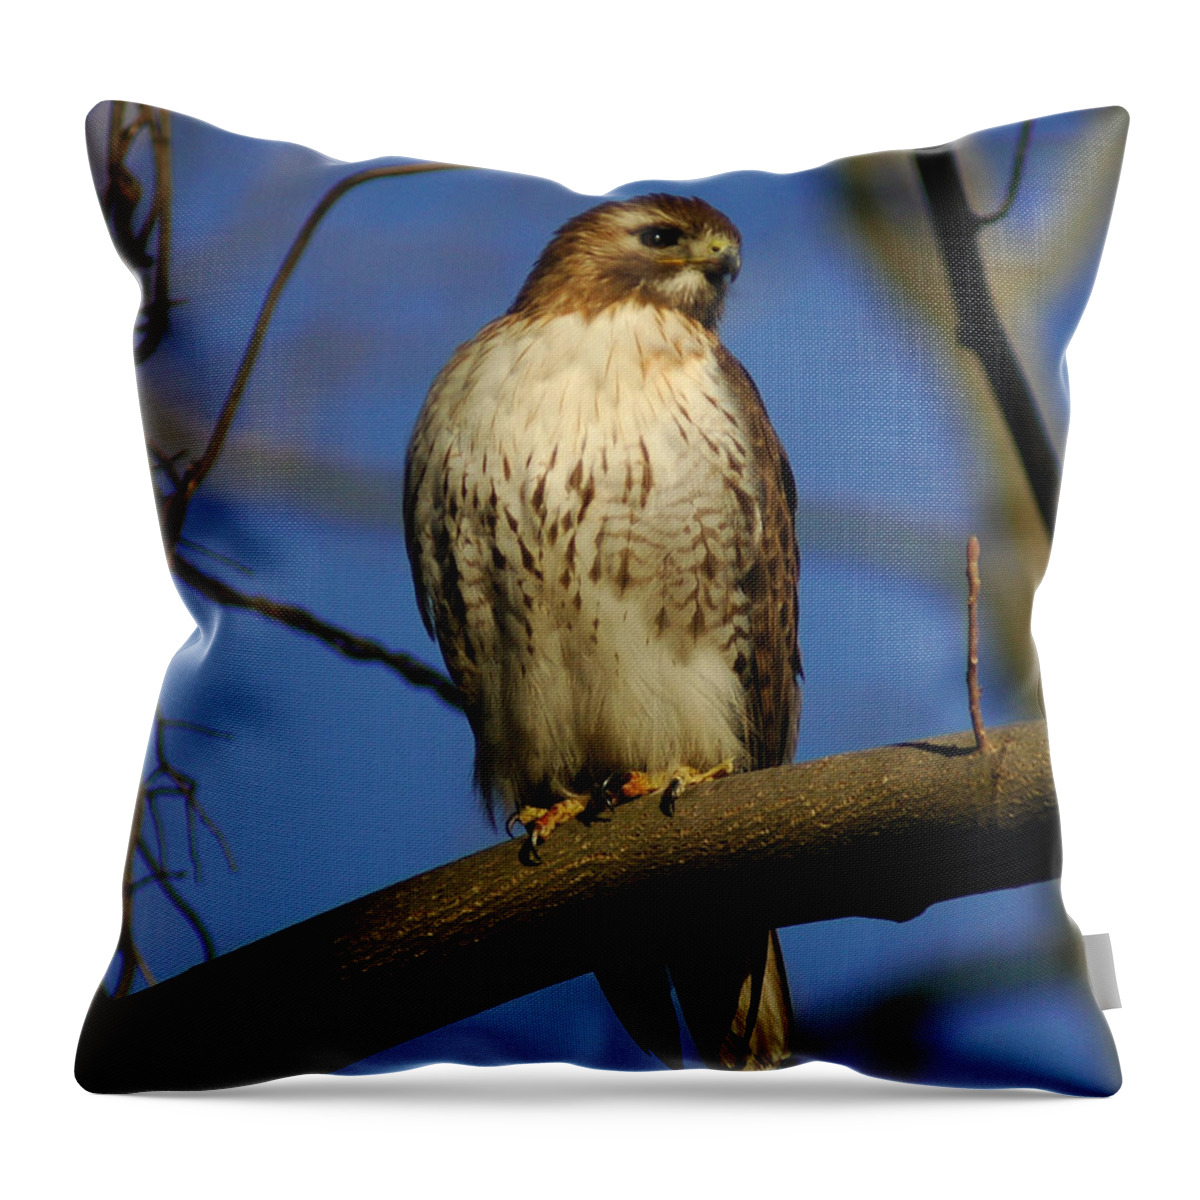 Red Tail Throw Pillow featuring the photograph A Red Tail Hawk by Raymond Salani III